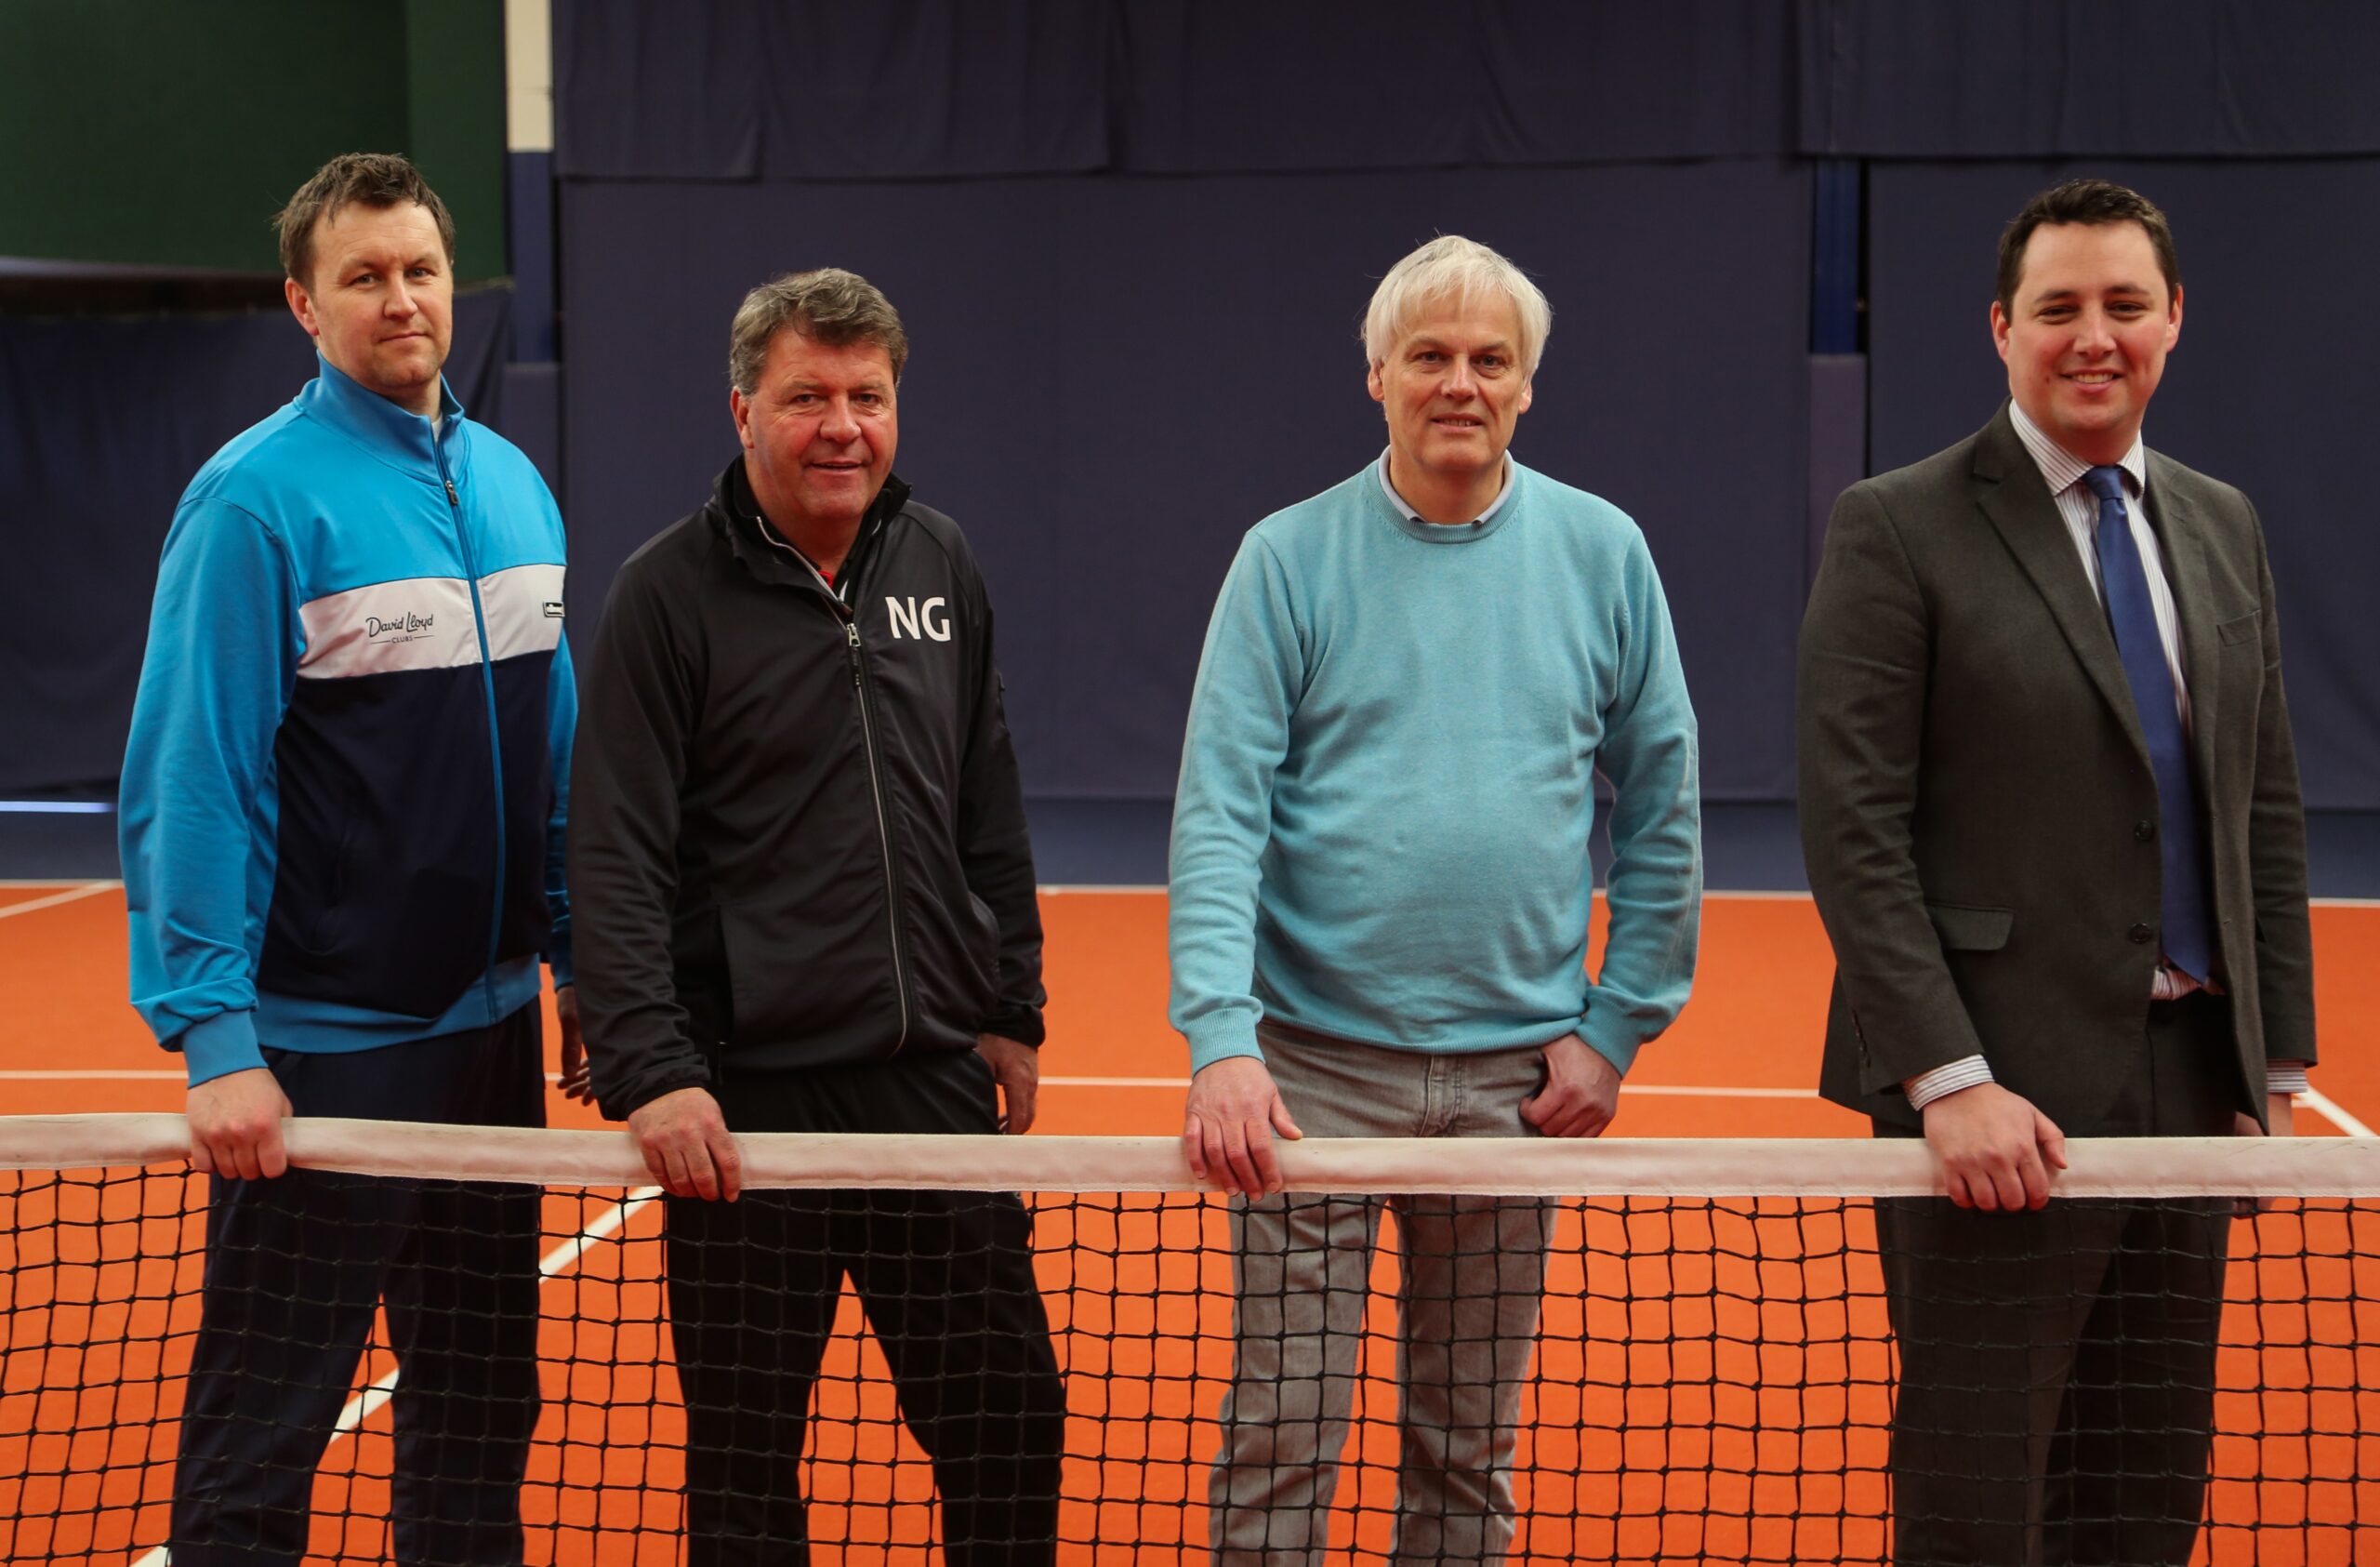 National Premier League for Tennis competition | Tees Valley Combined Authority